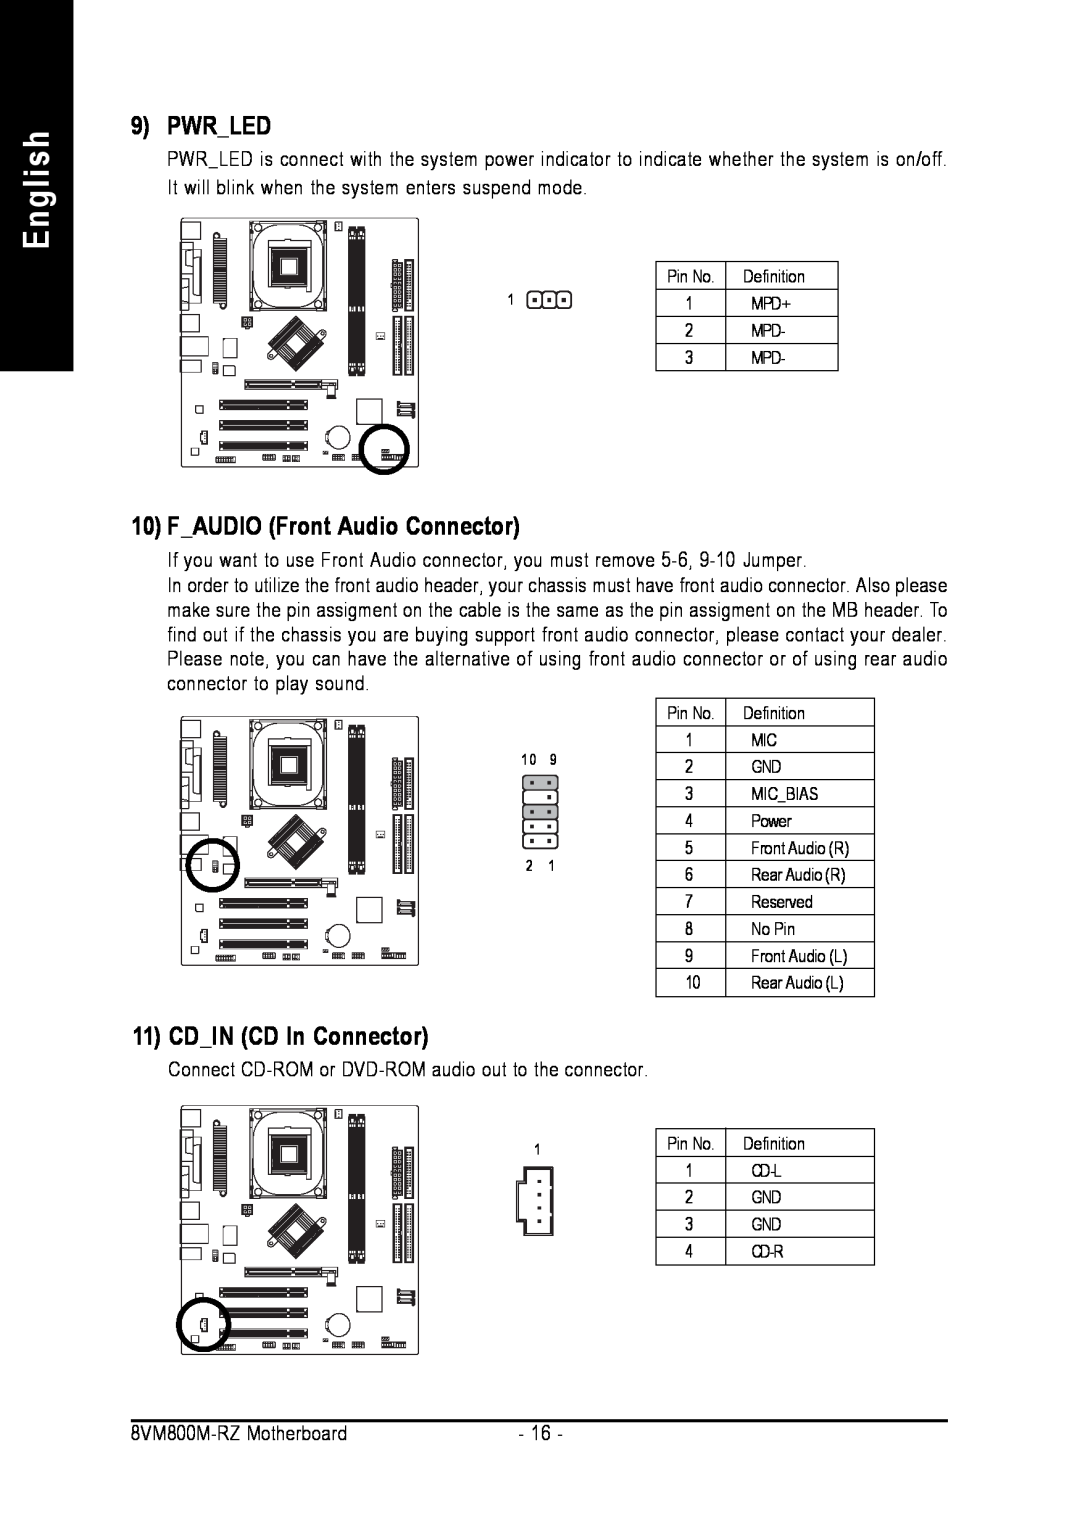 Intel 8VM800M-RZ user manual English, Pwr Led, F AUDIO Front Audio Connector, CD IN CD In Connector 